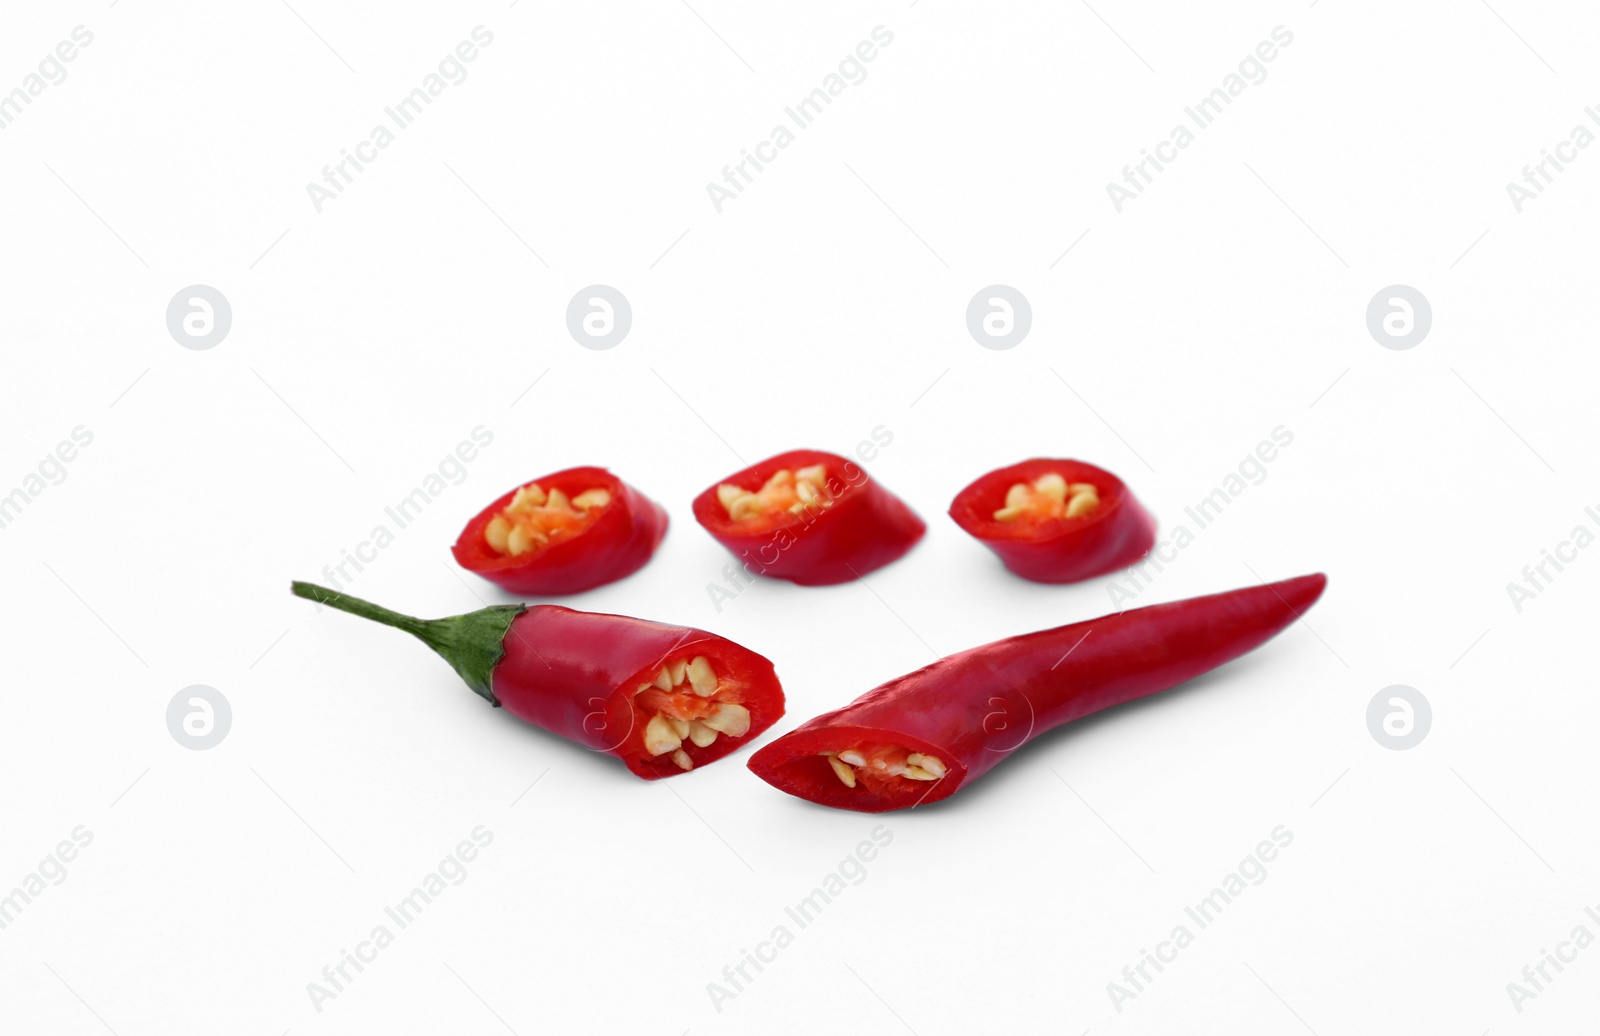 Photo of Cut red hot chili peppers on white background